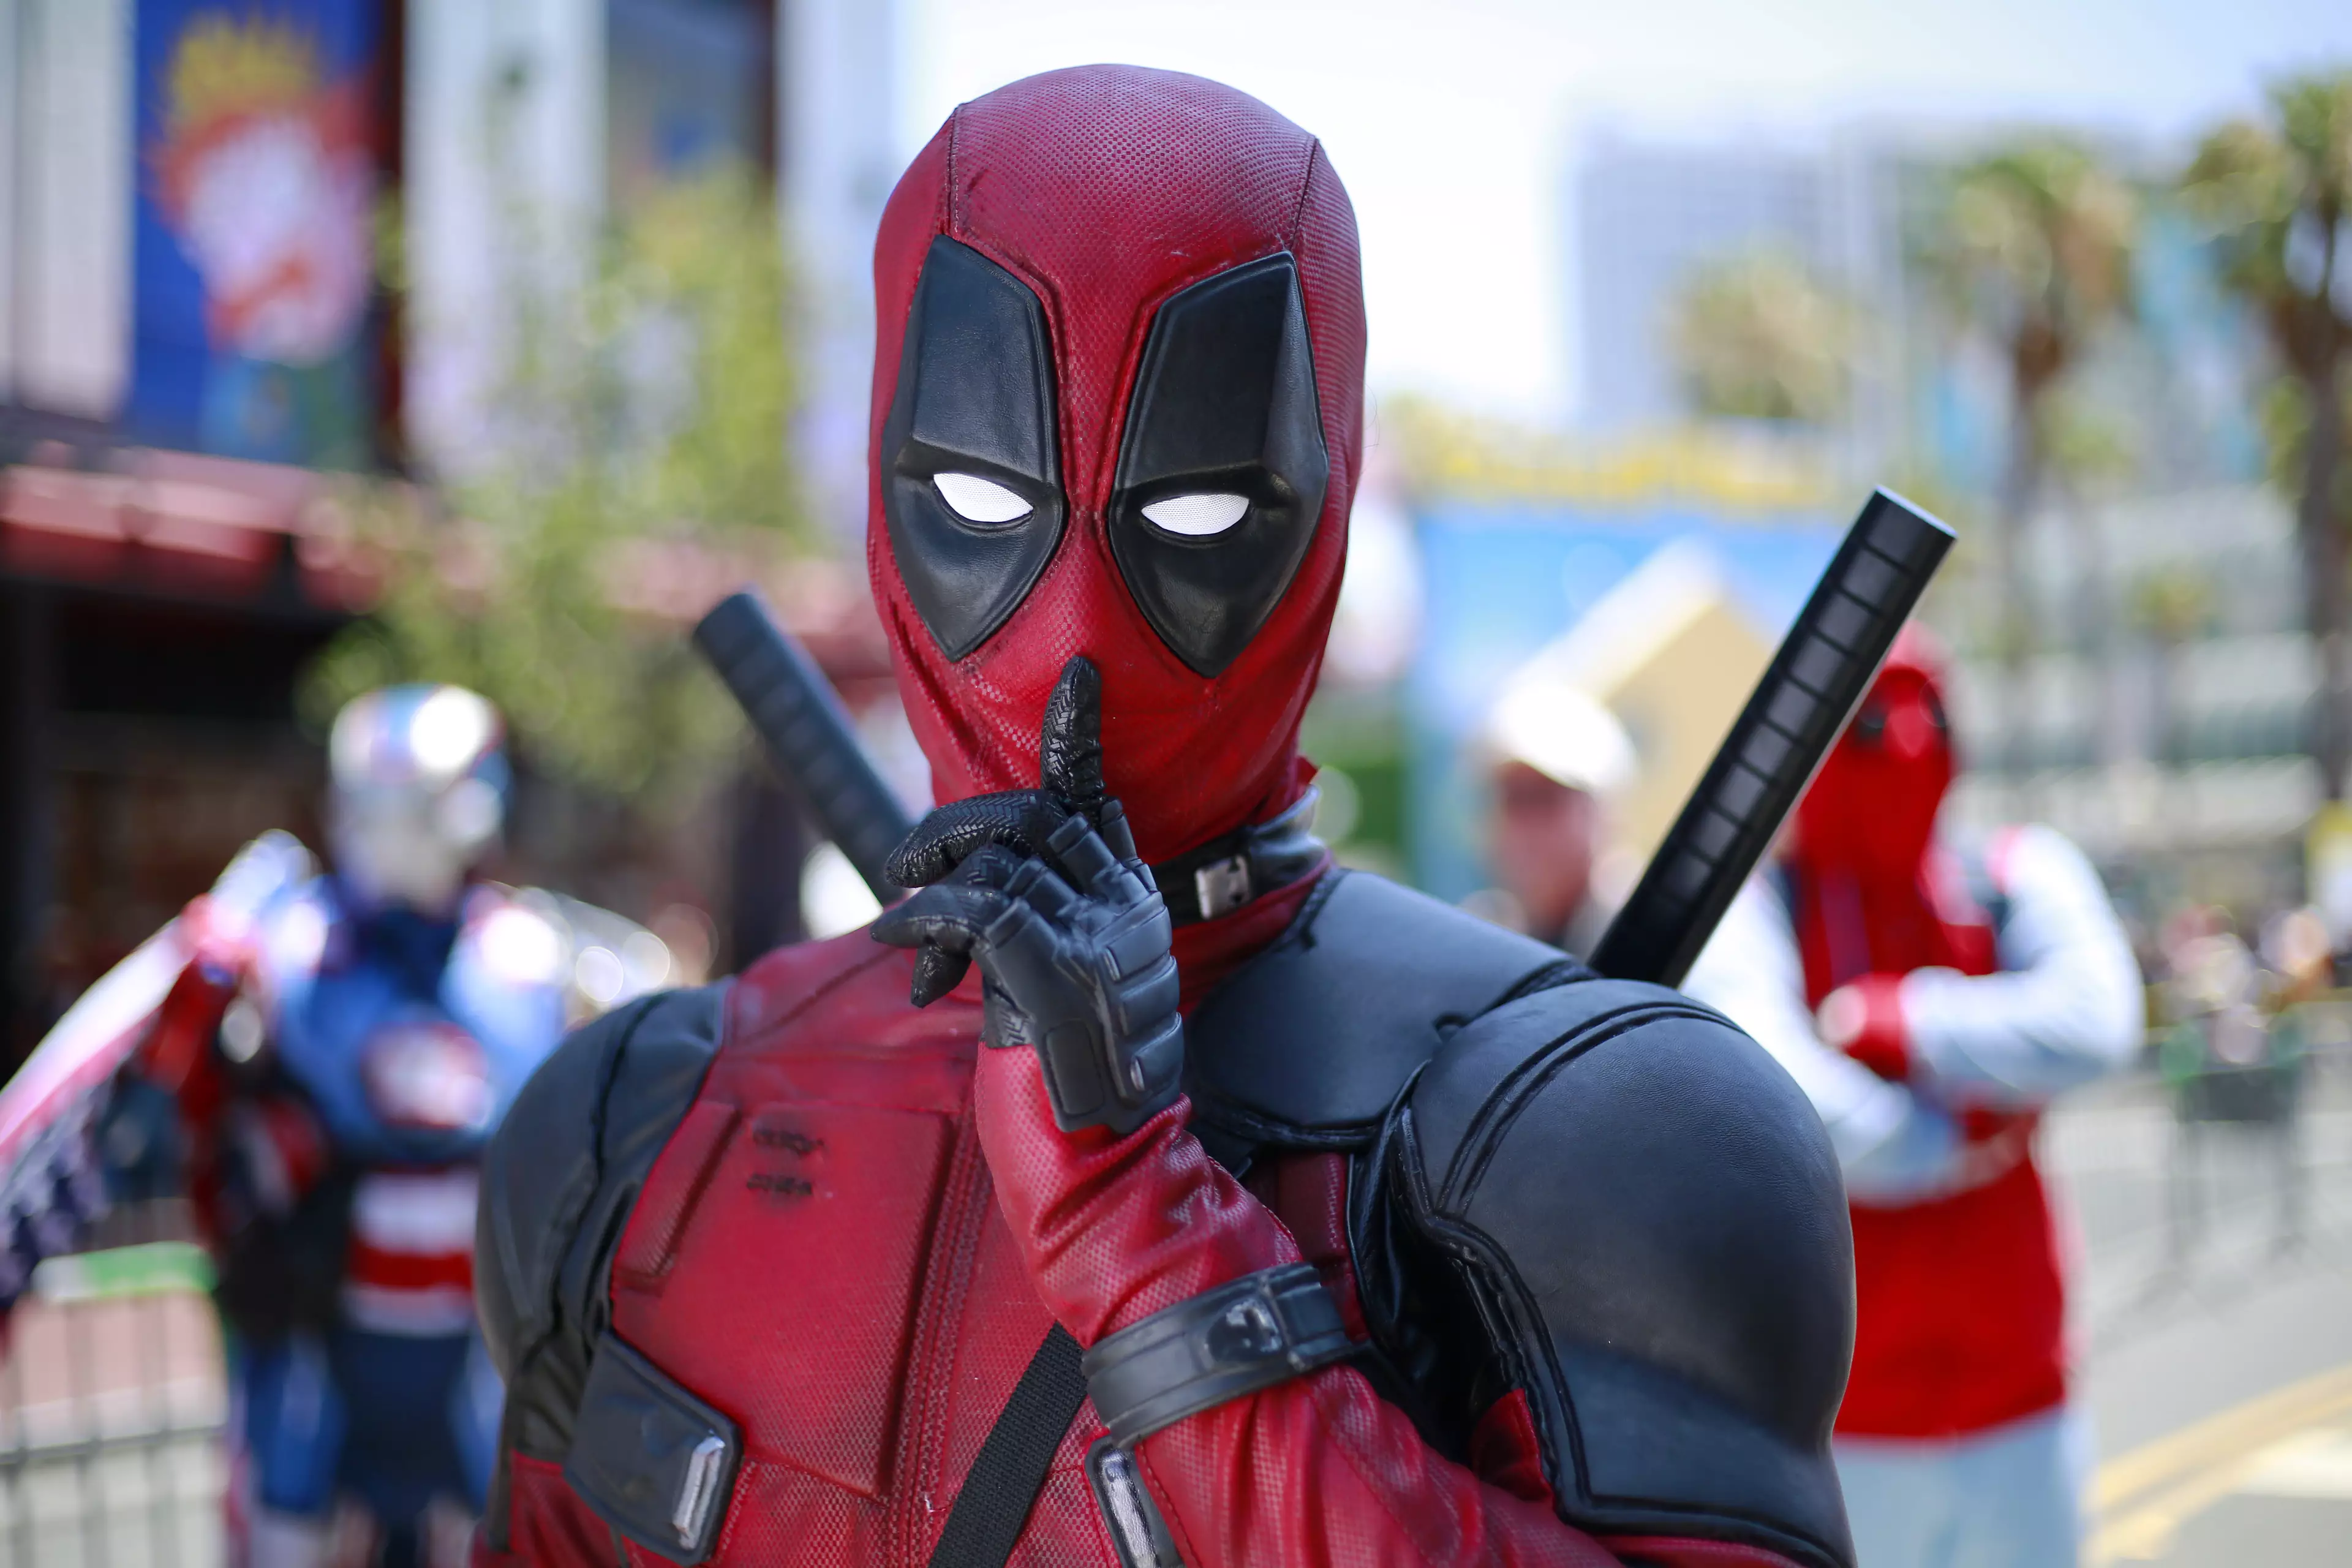 A stuntwoman was killed on the set of Deadpool 2 in August 2017.